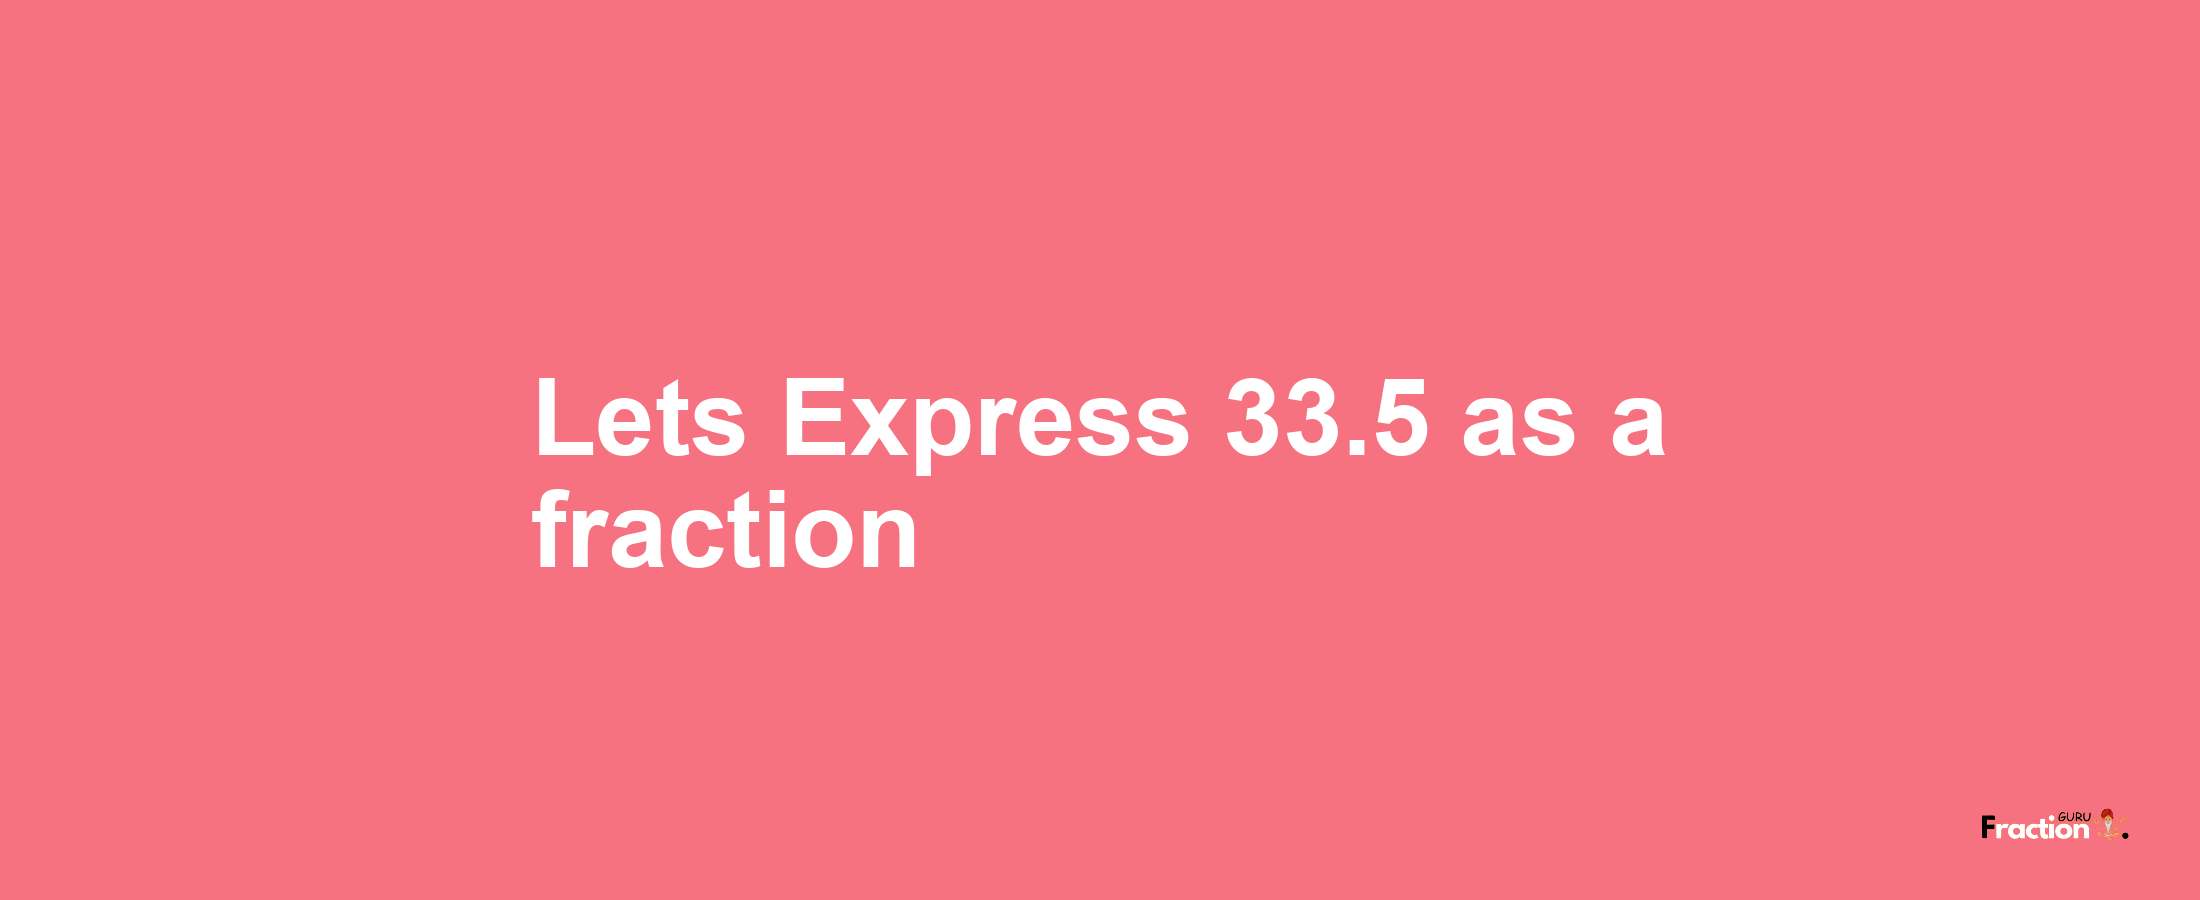 Lets Express 33.5 as afraction